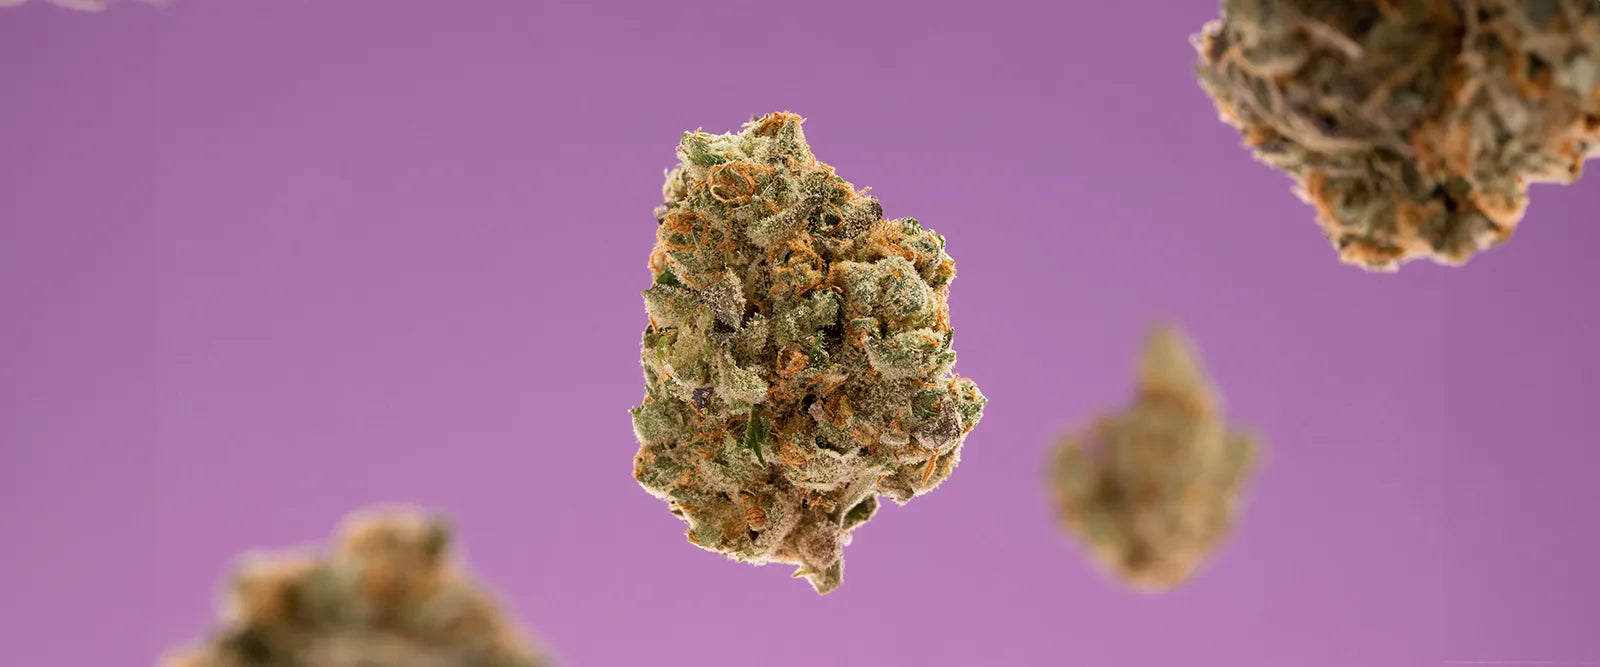 Beginner’s Bud: Best Cannabis Strains for New Users